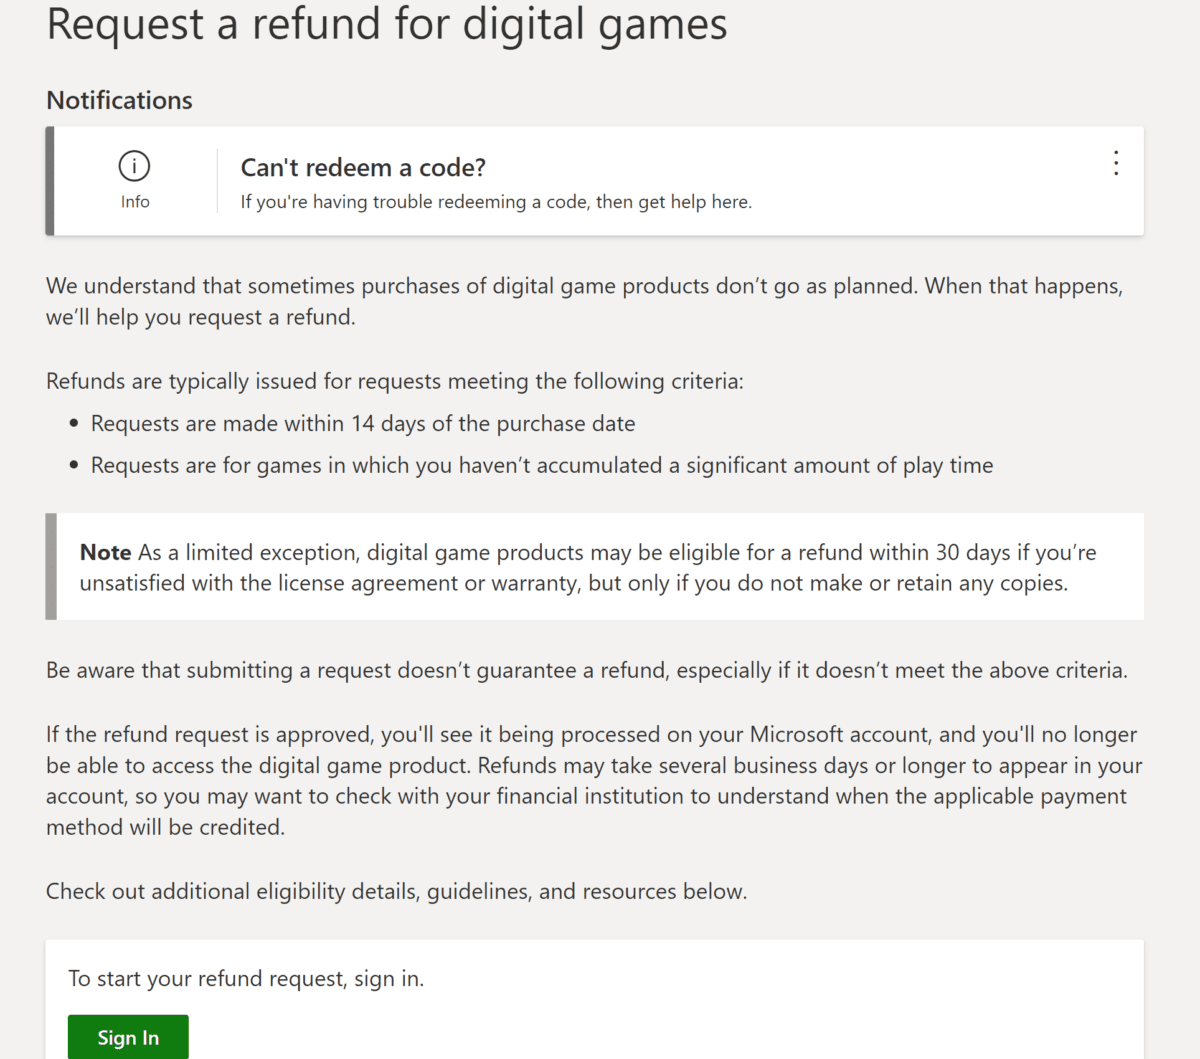 How To Refund Digital Games